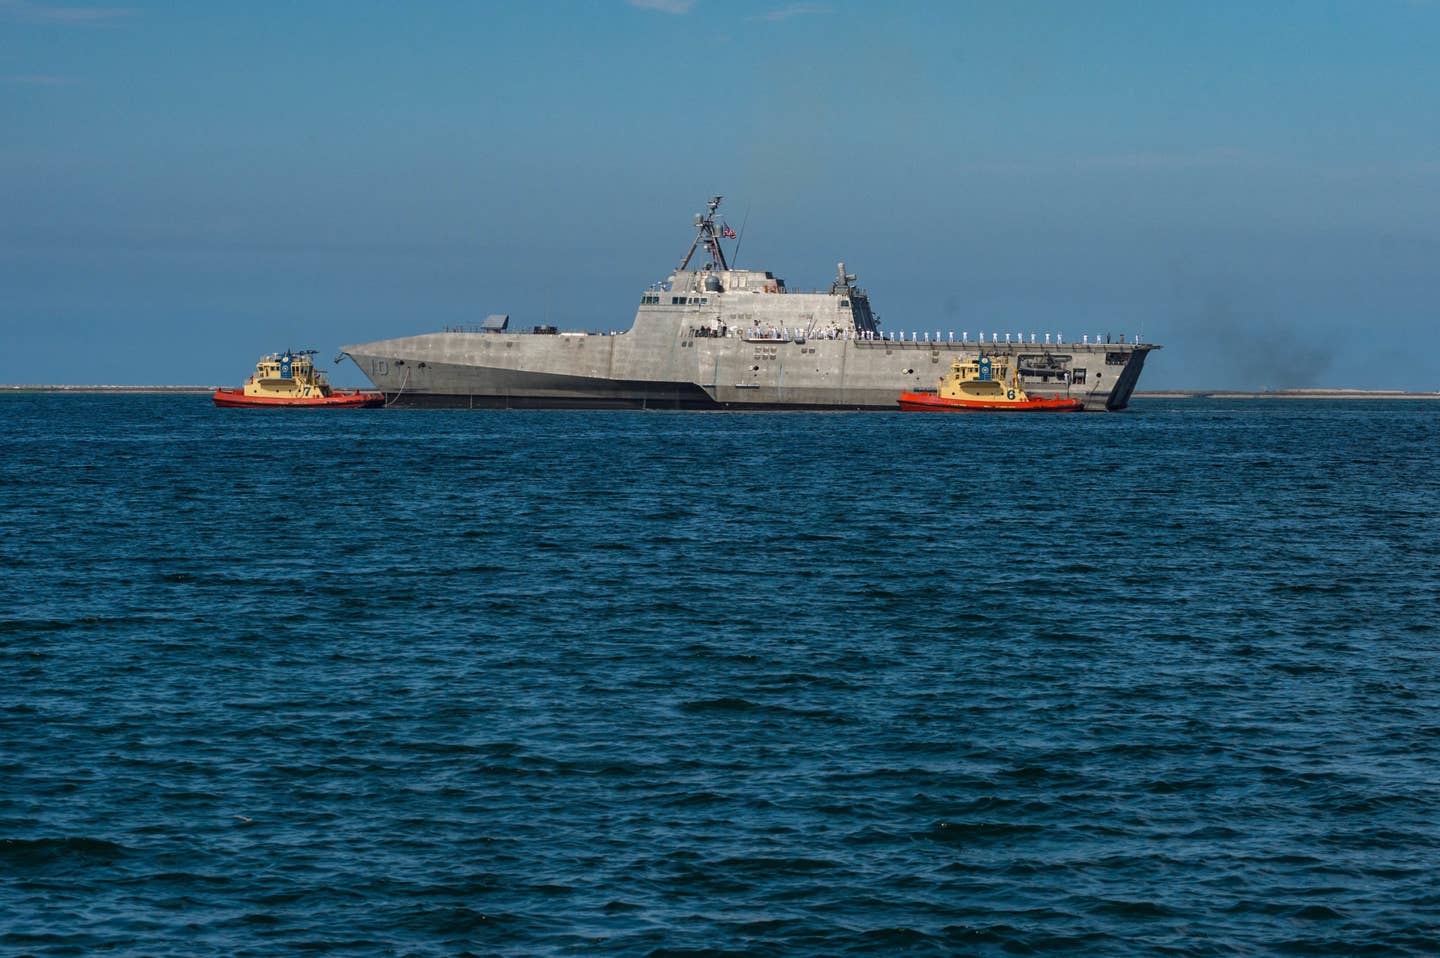 The littoral combat ship USS Gabrielle Giffords (LCS 10) transits San Diego Bay to arrive at the ship's homeport of Naval Base San Diego. Gabrielle Giffords is the newest Independence-variant littoral combat ship and one of seven littoral combat ships homeported in San Diego. (U.S. Navy photo by Mass Communication Specialist Seaman Nicholas Burgains)